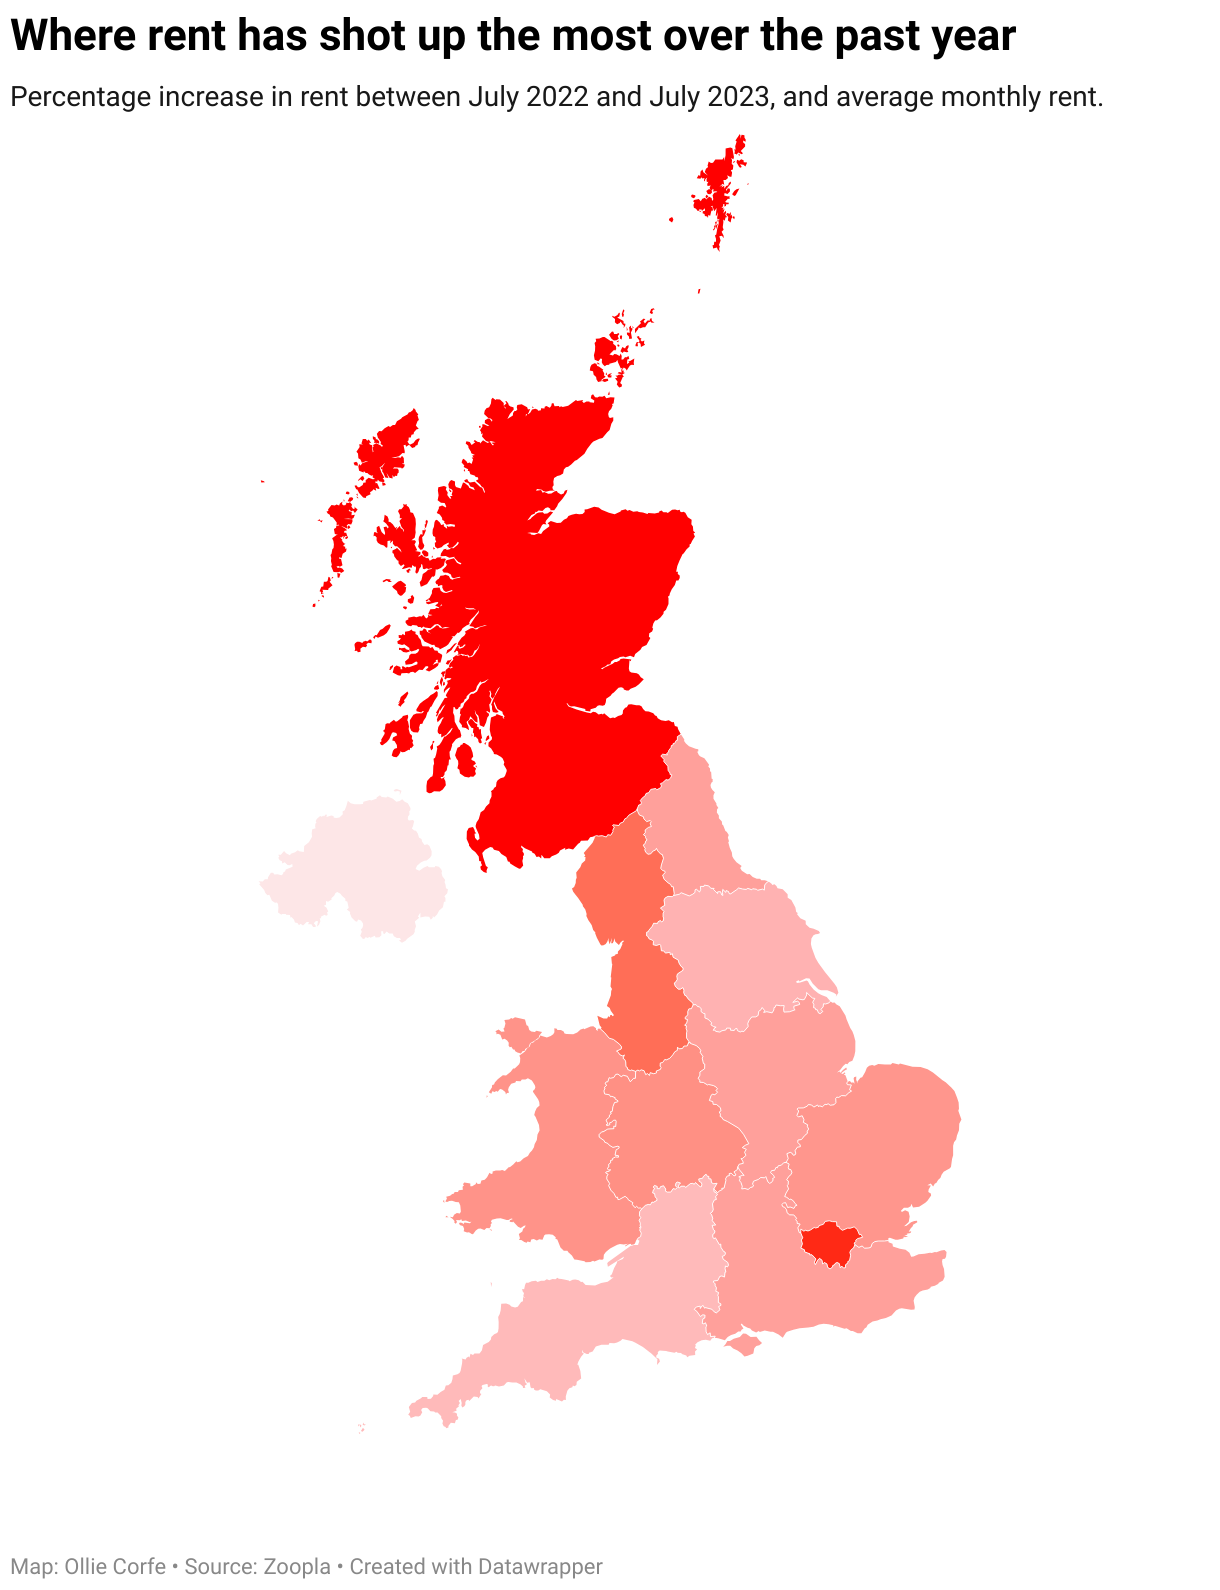 Rent price increases in the UK.